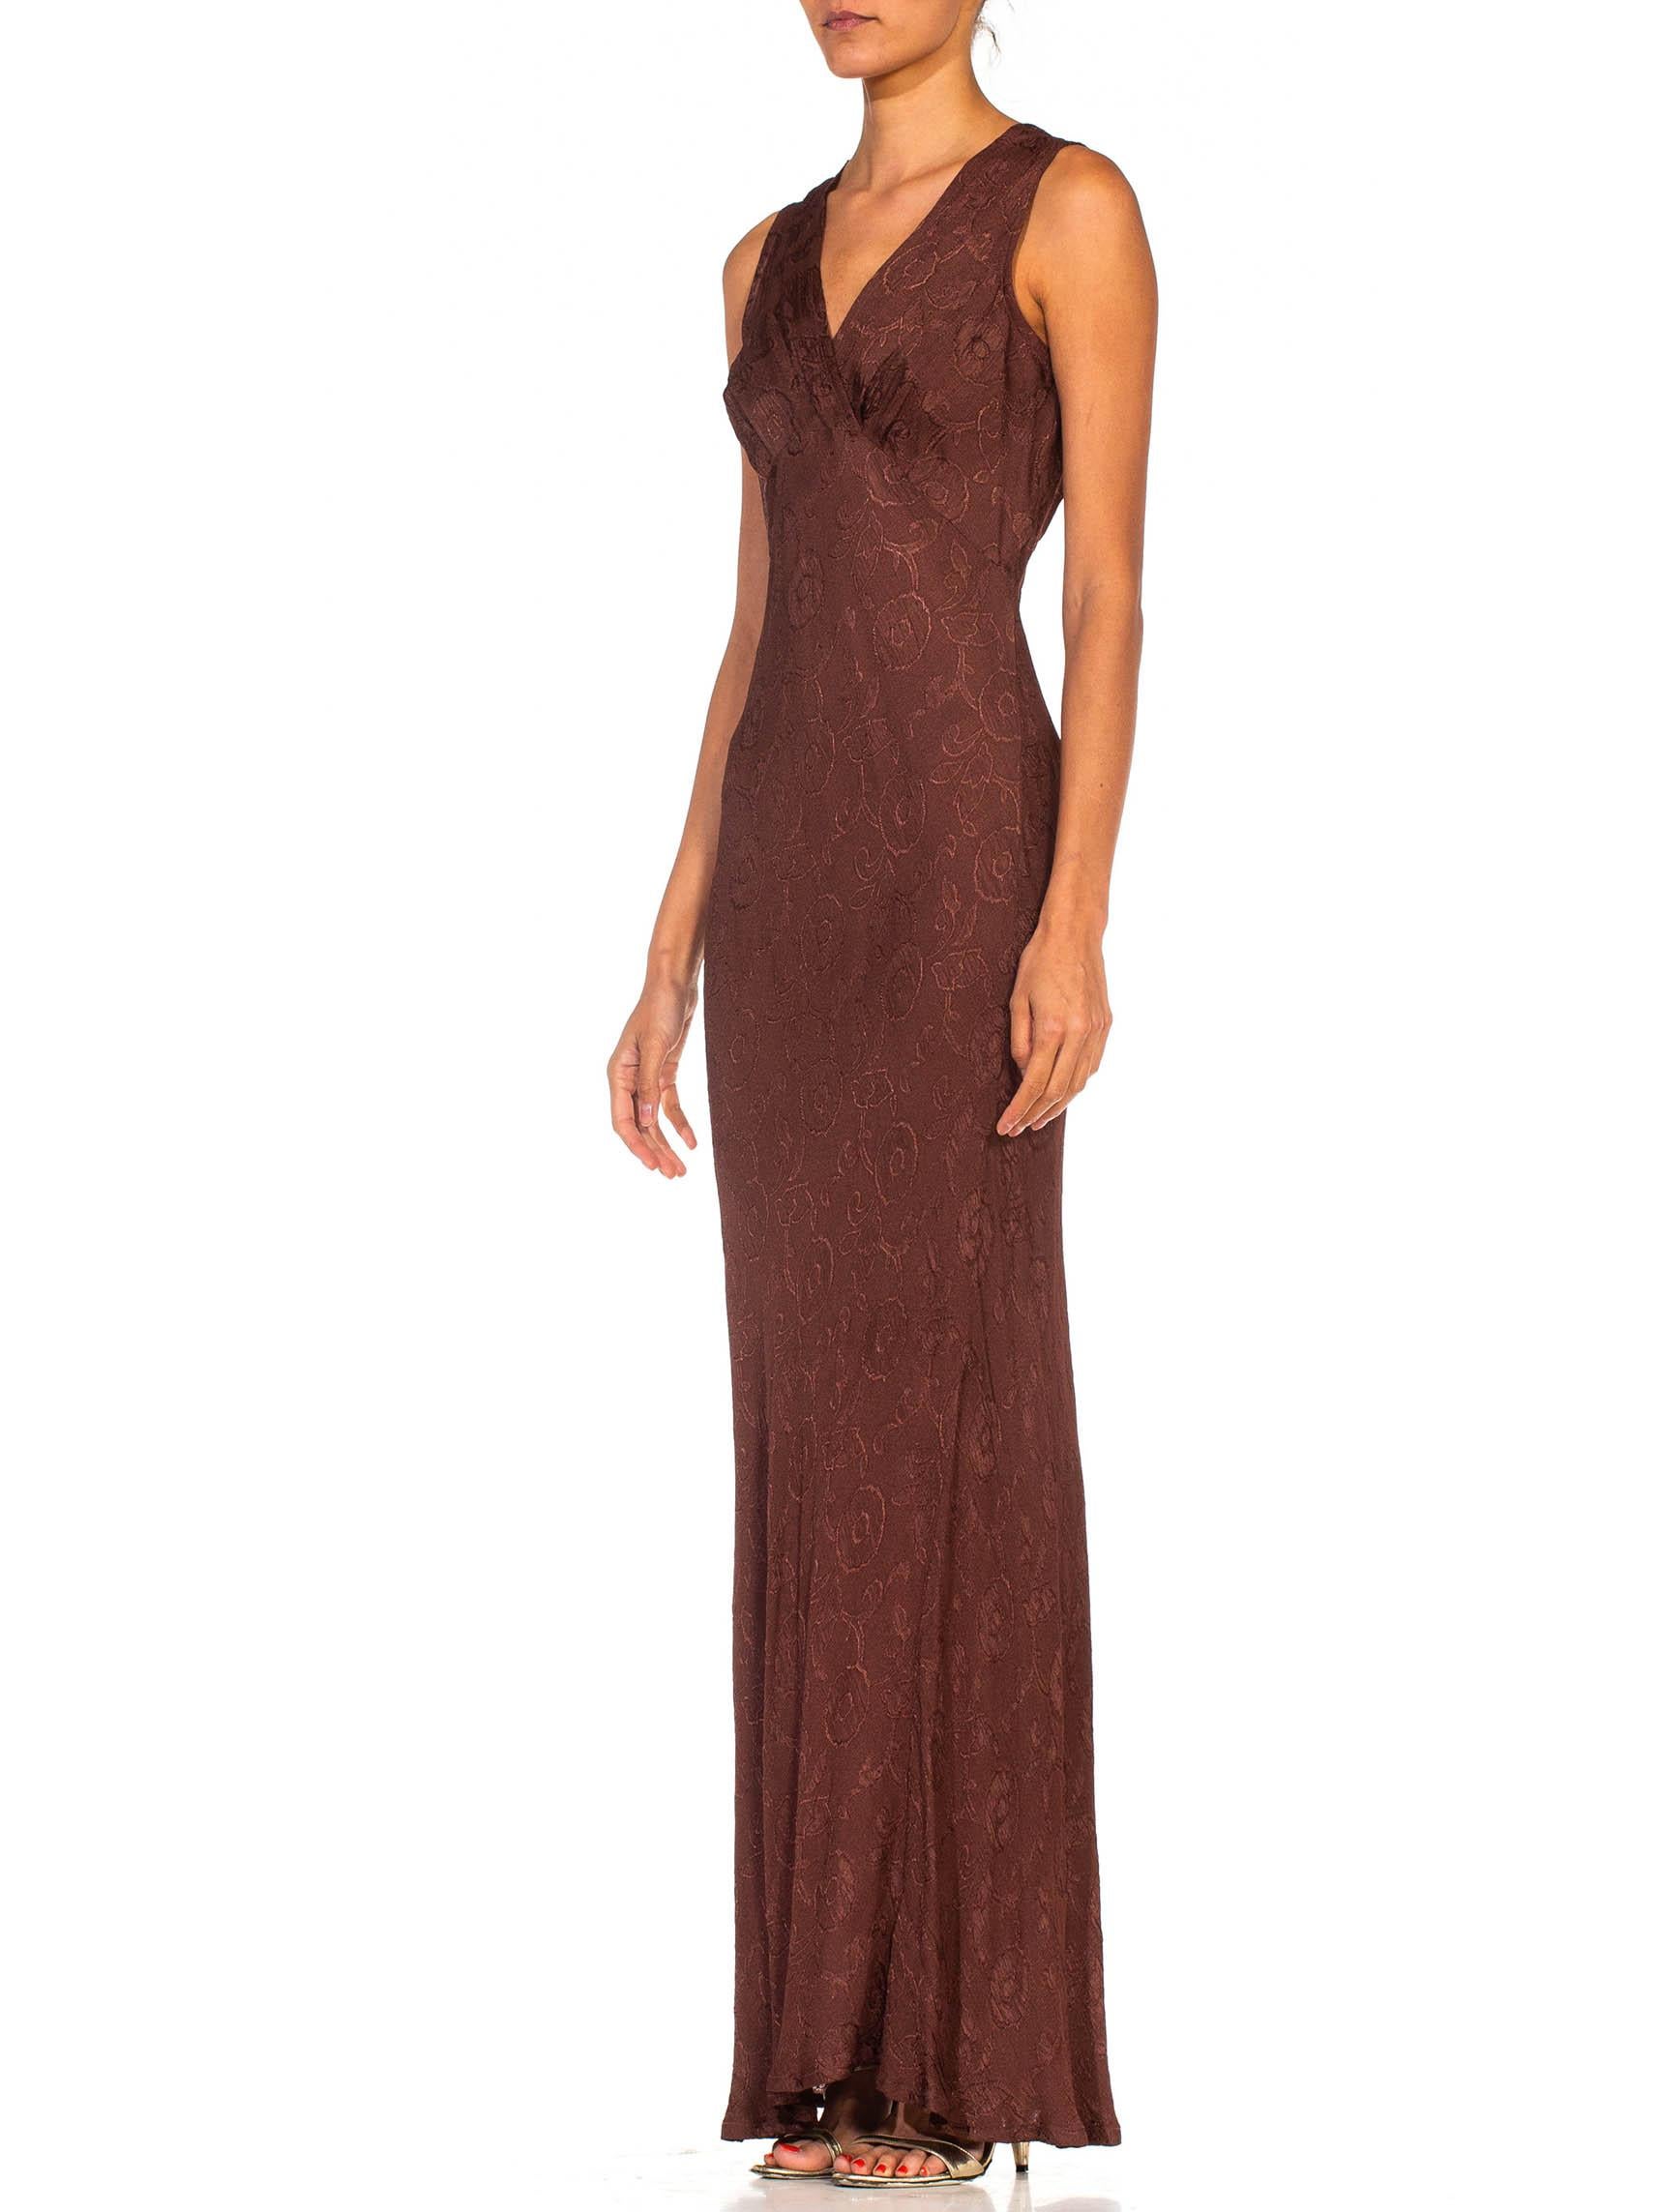 1990S Burnt Sienna Bias Cut Rayon Jacquard 1930S Style Slip Dress In Excellent Condition For Sale In New York, NY